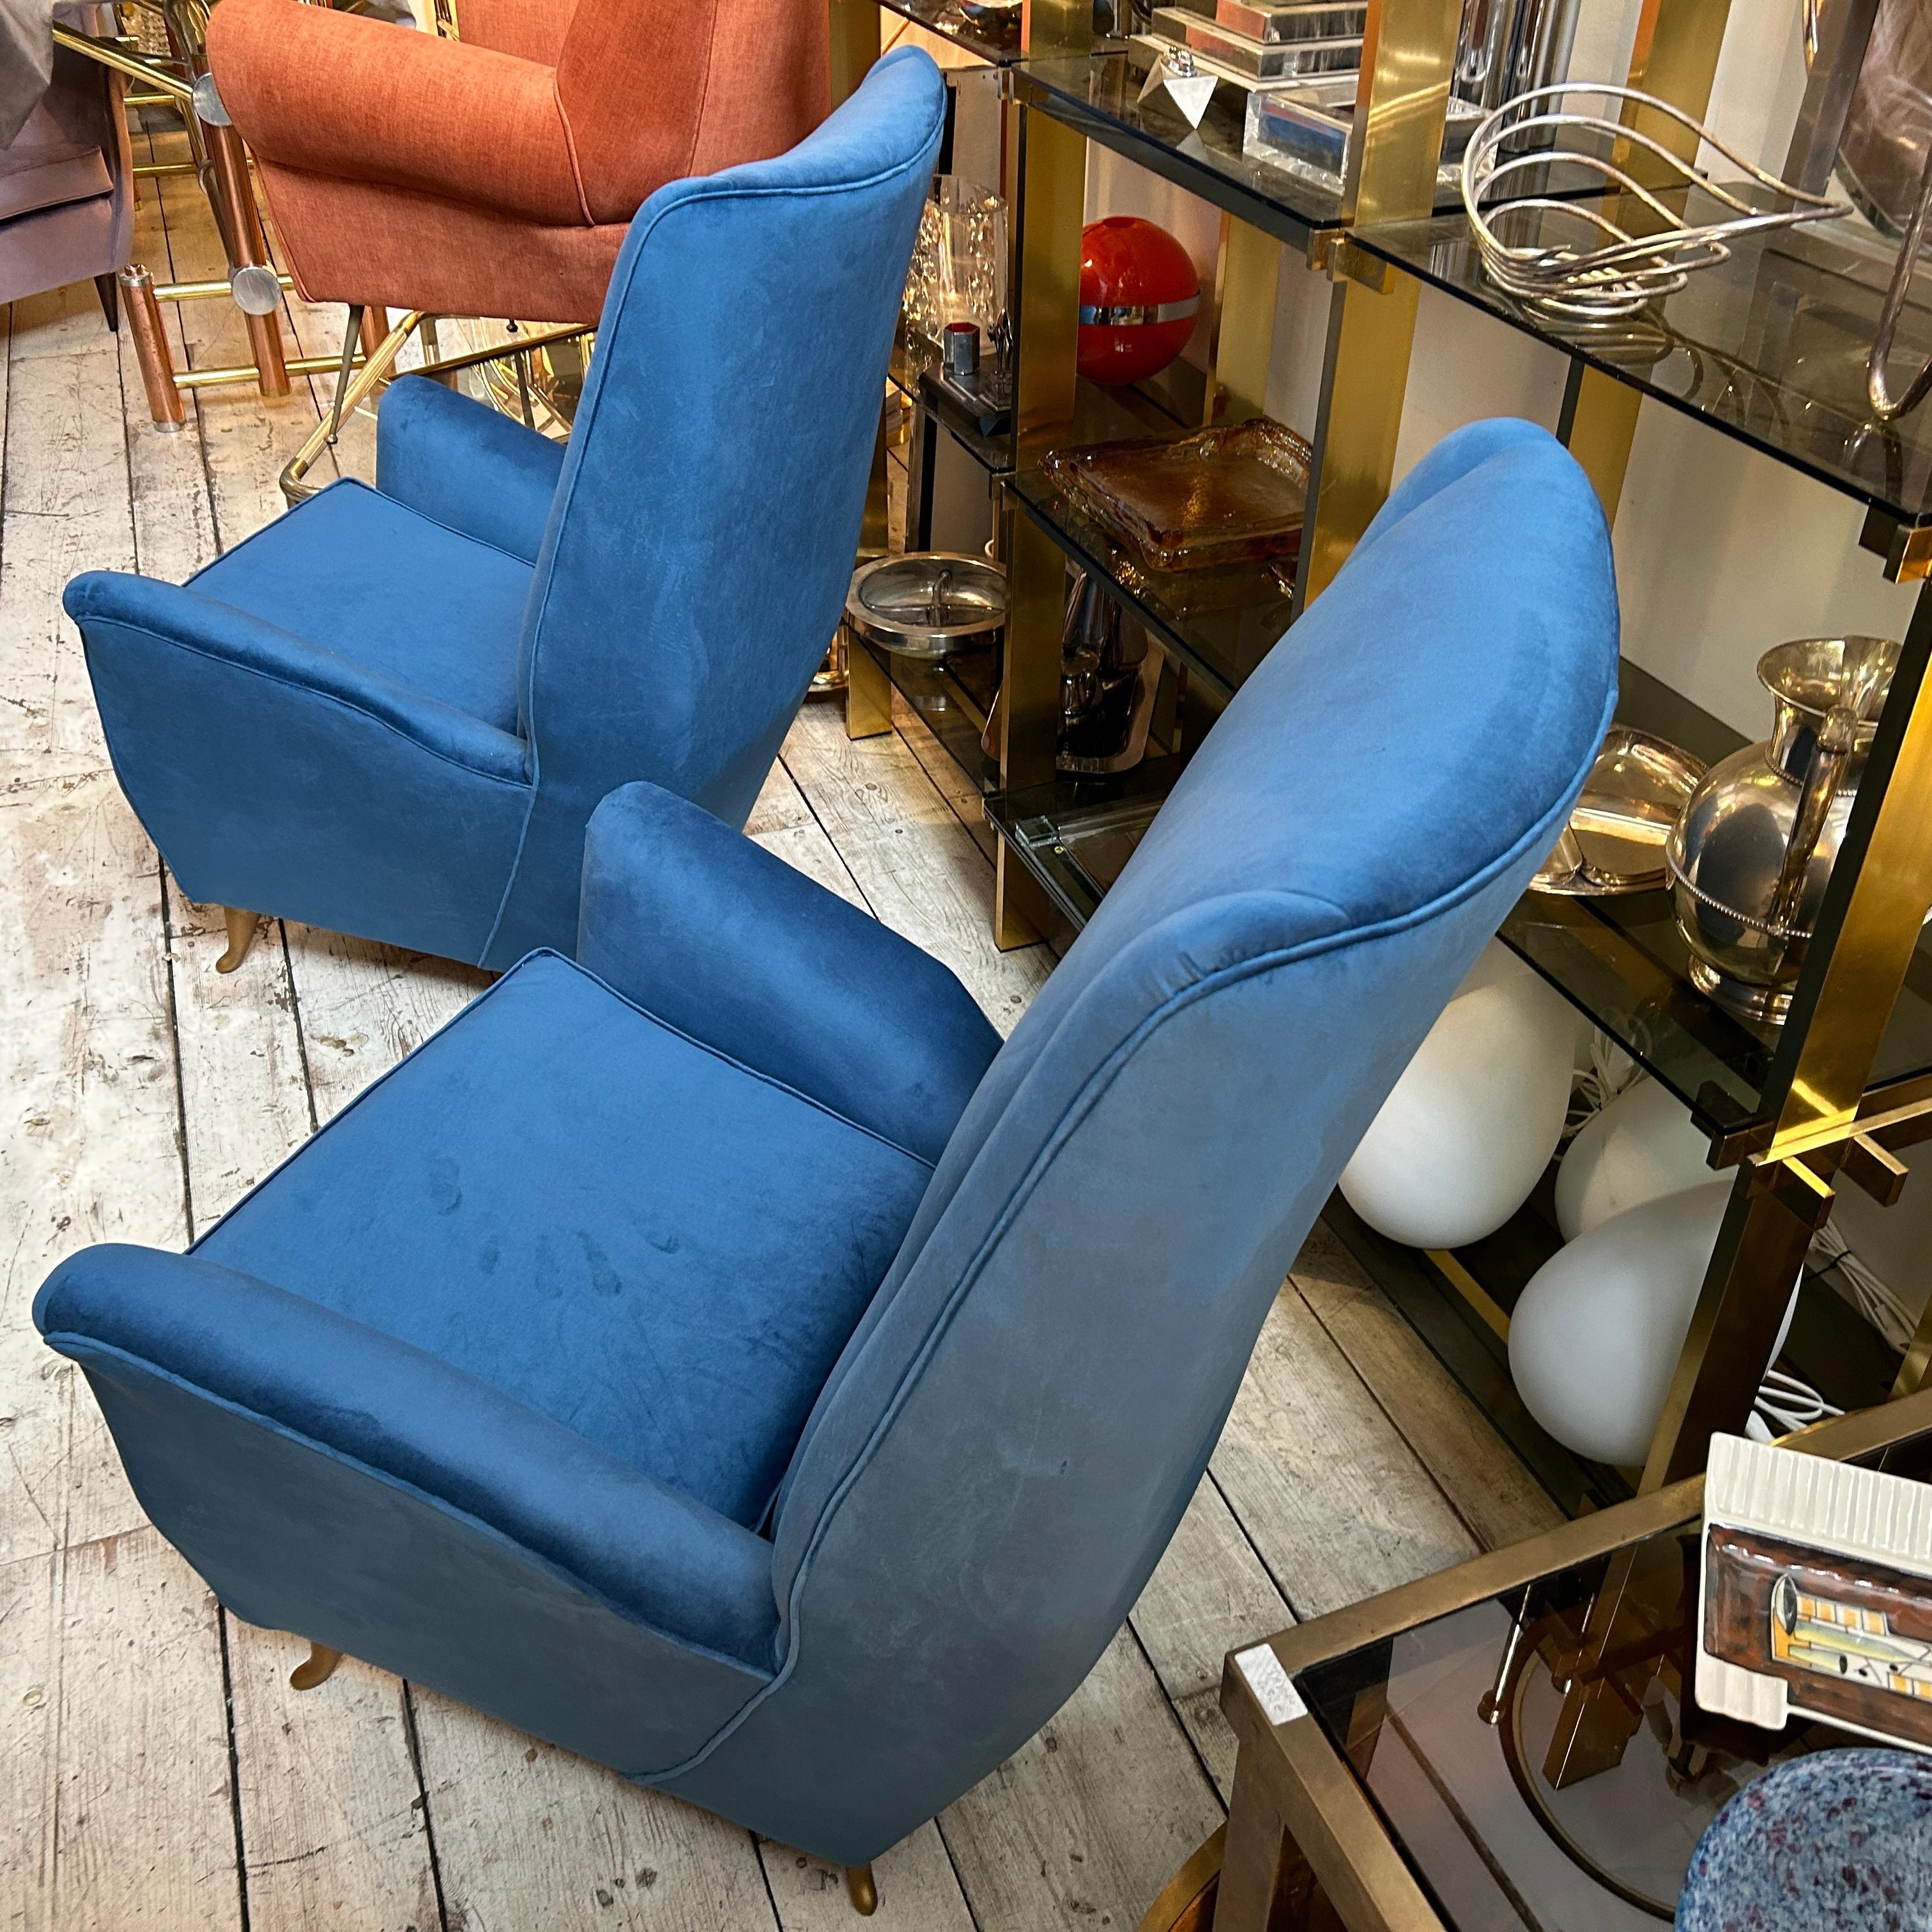 Italian 1950s Two Mid-Century Modern High Back Armchairs by Gio Ponti for Isa Bergamo For Sale